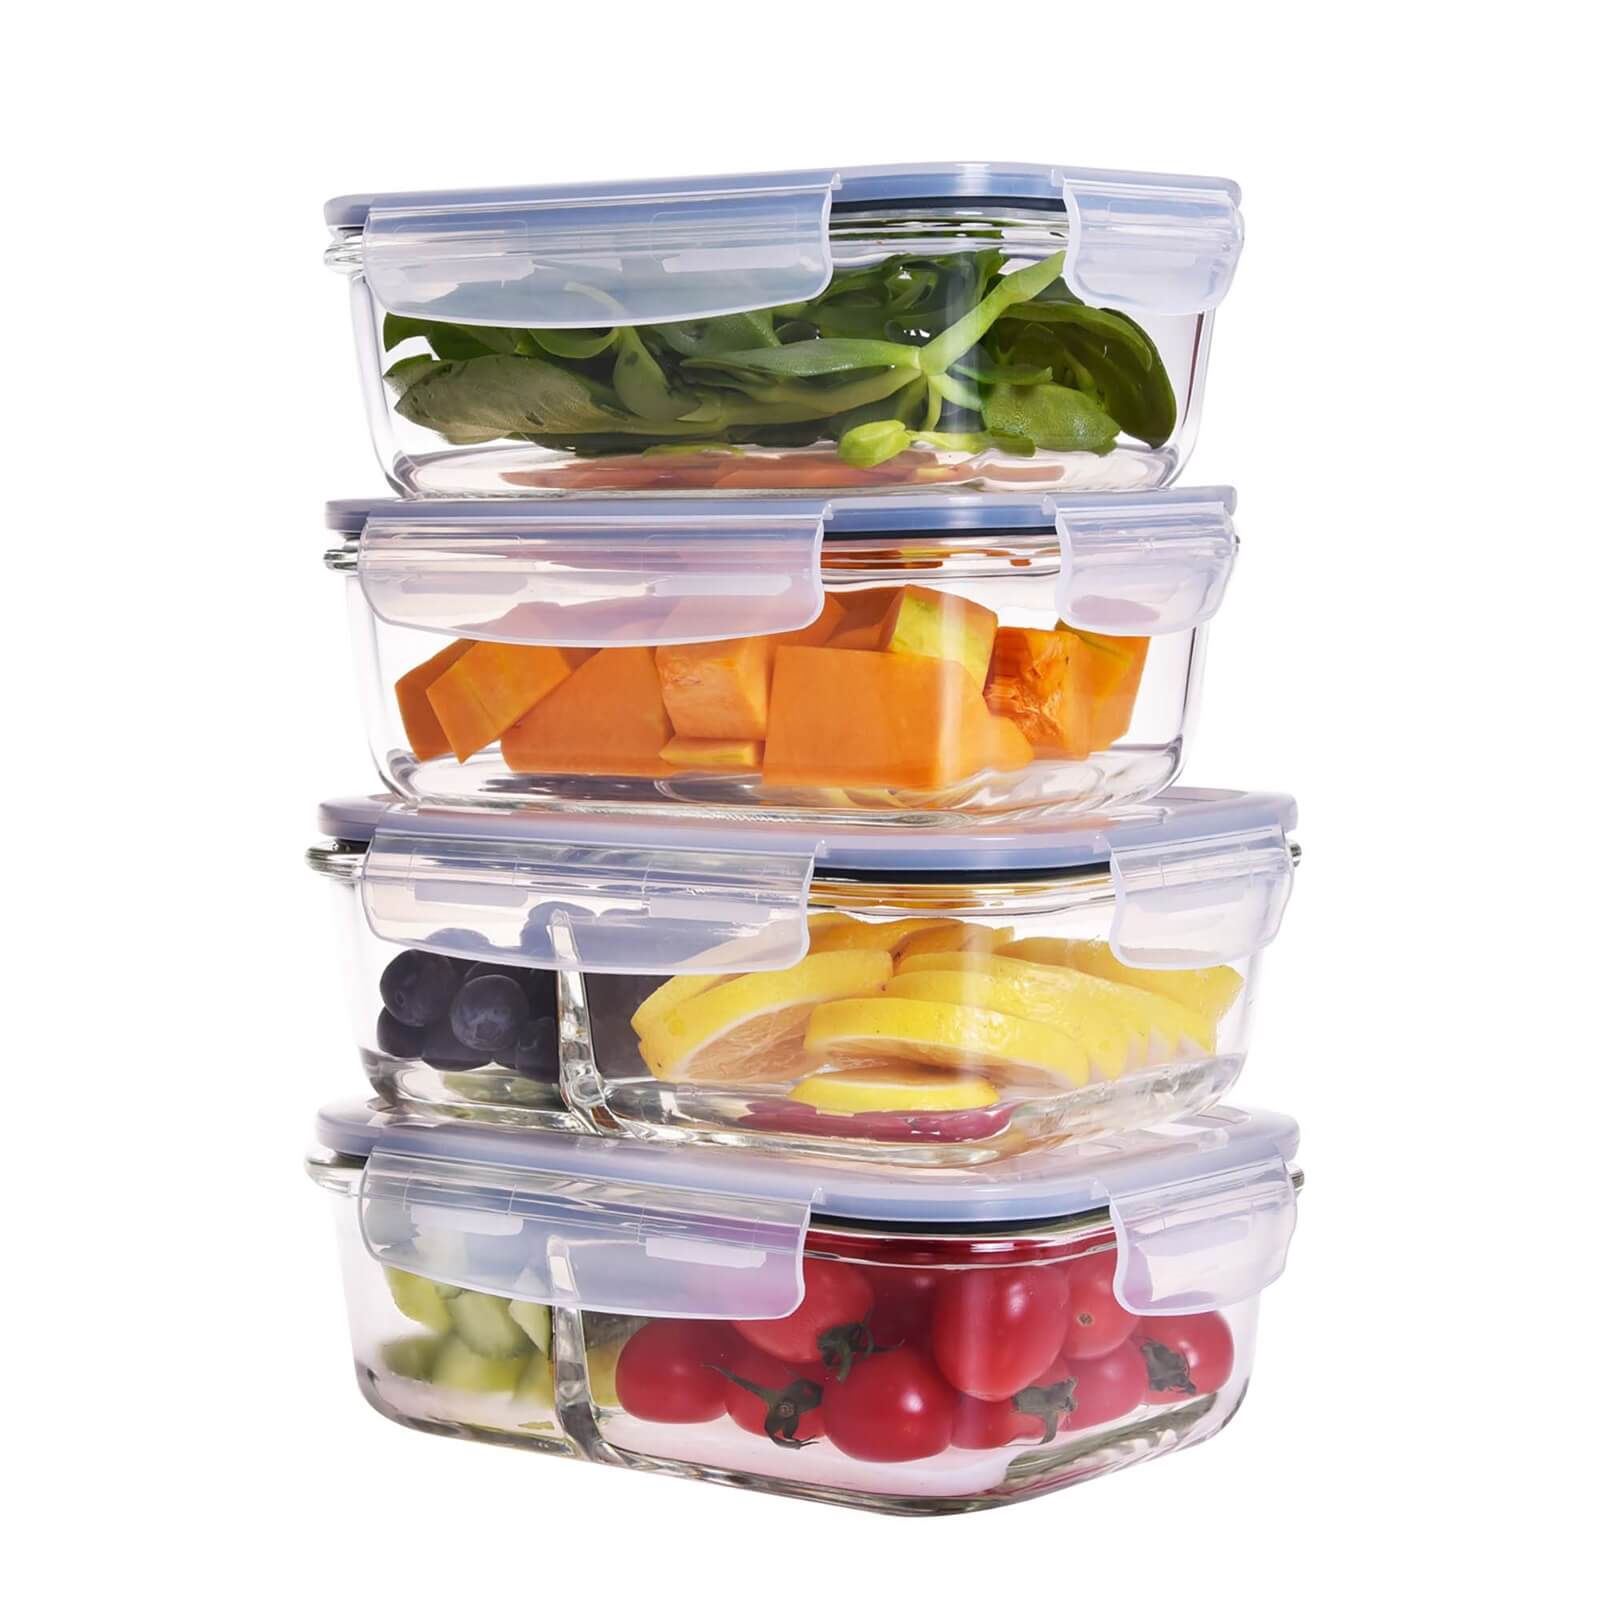 Glass Food Containers - 4 Piece Set